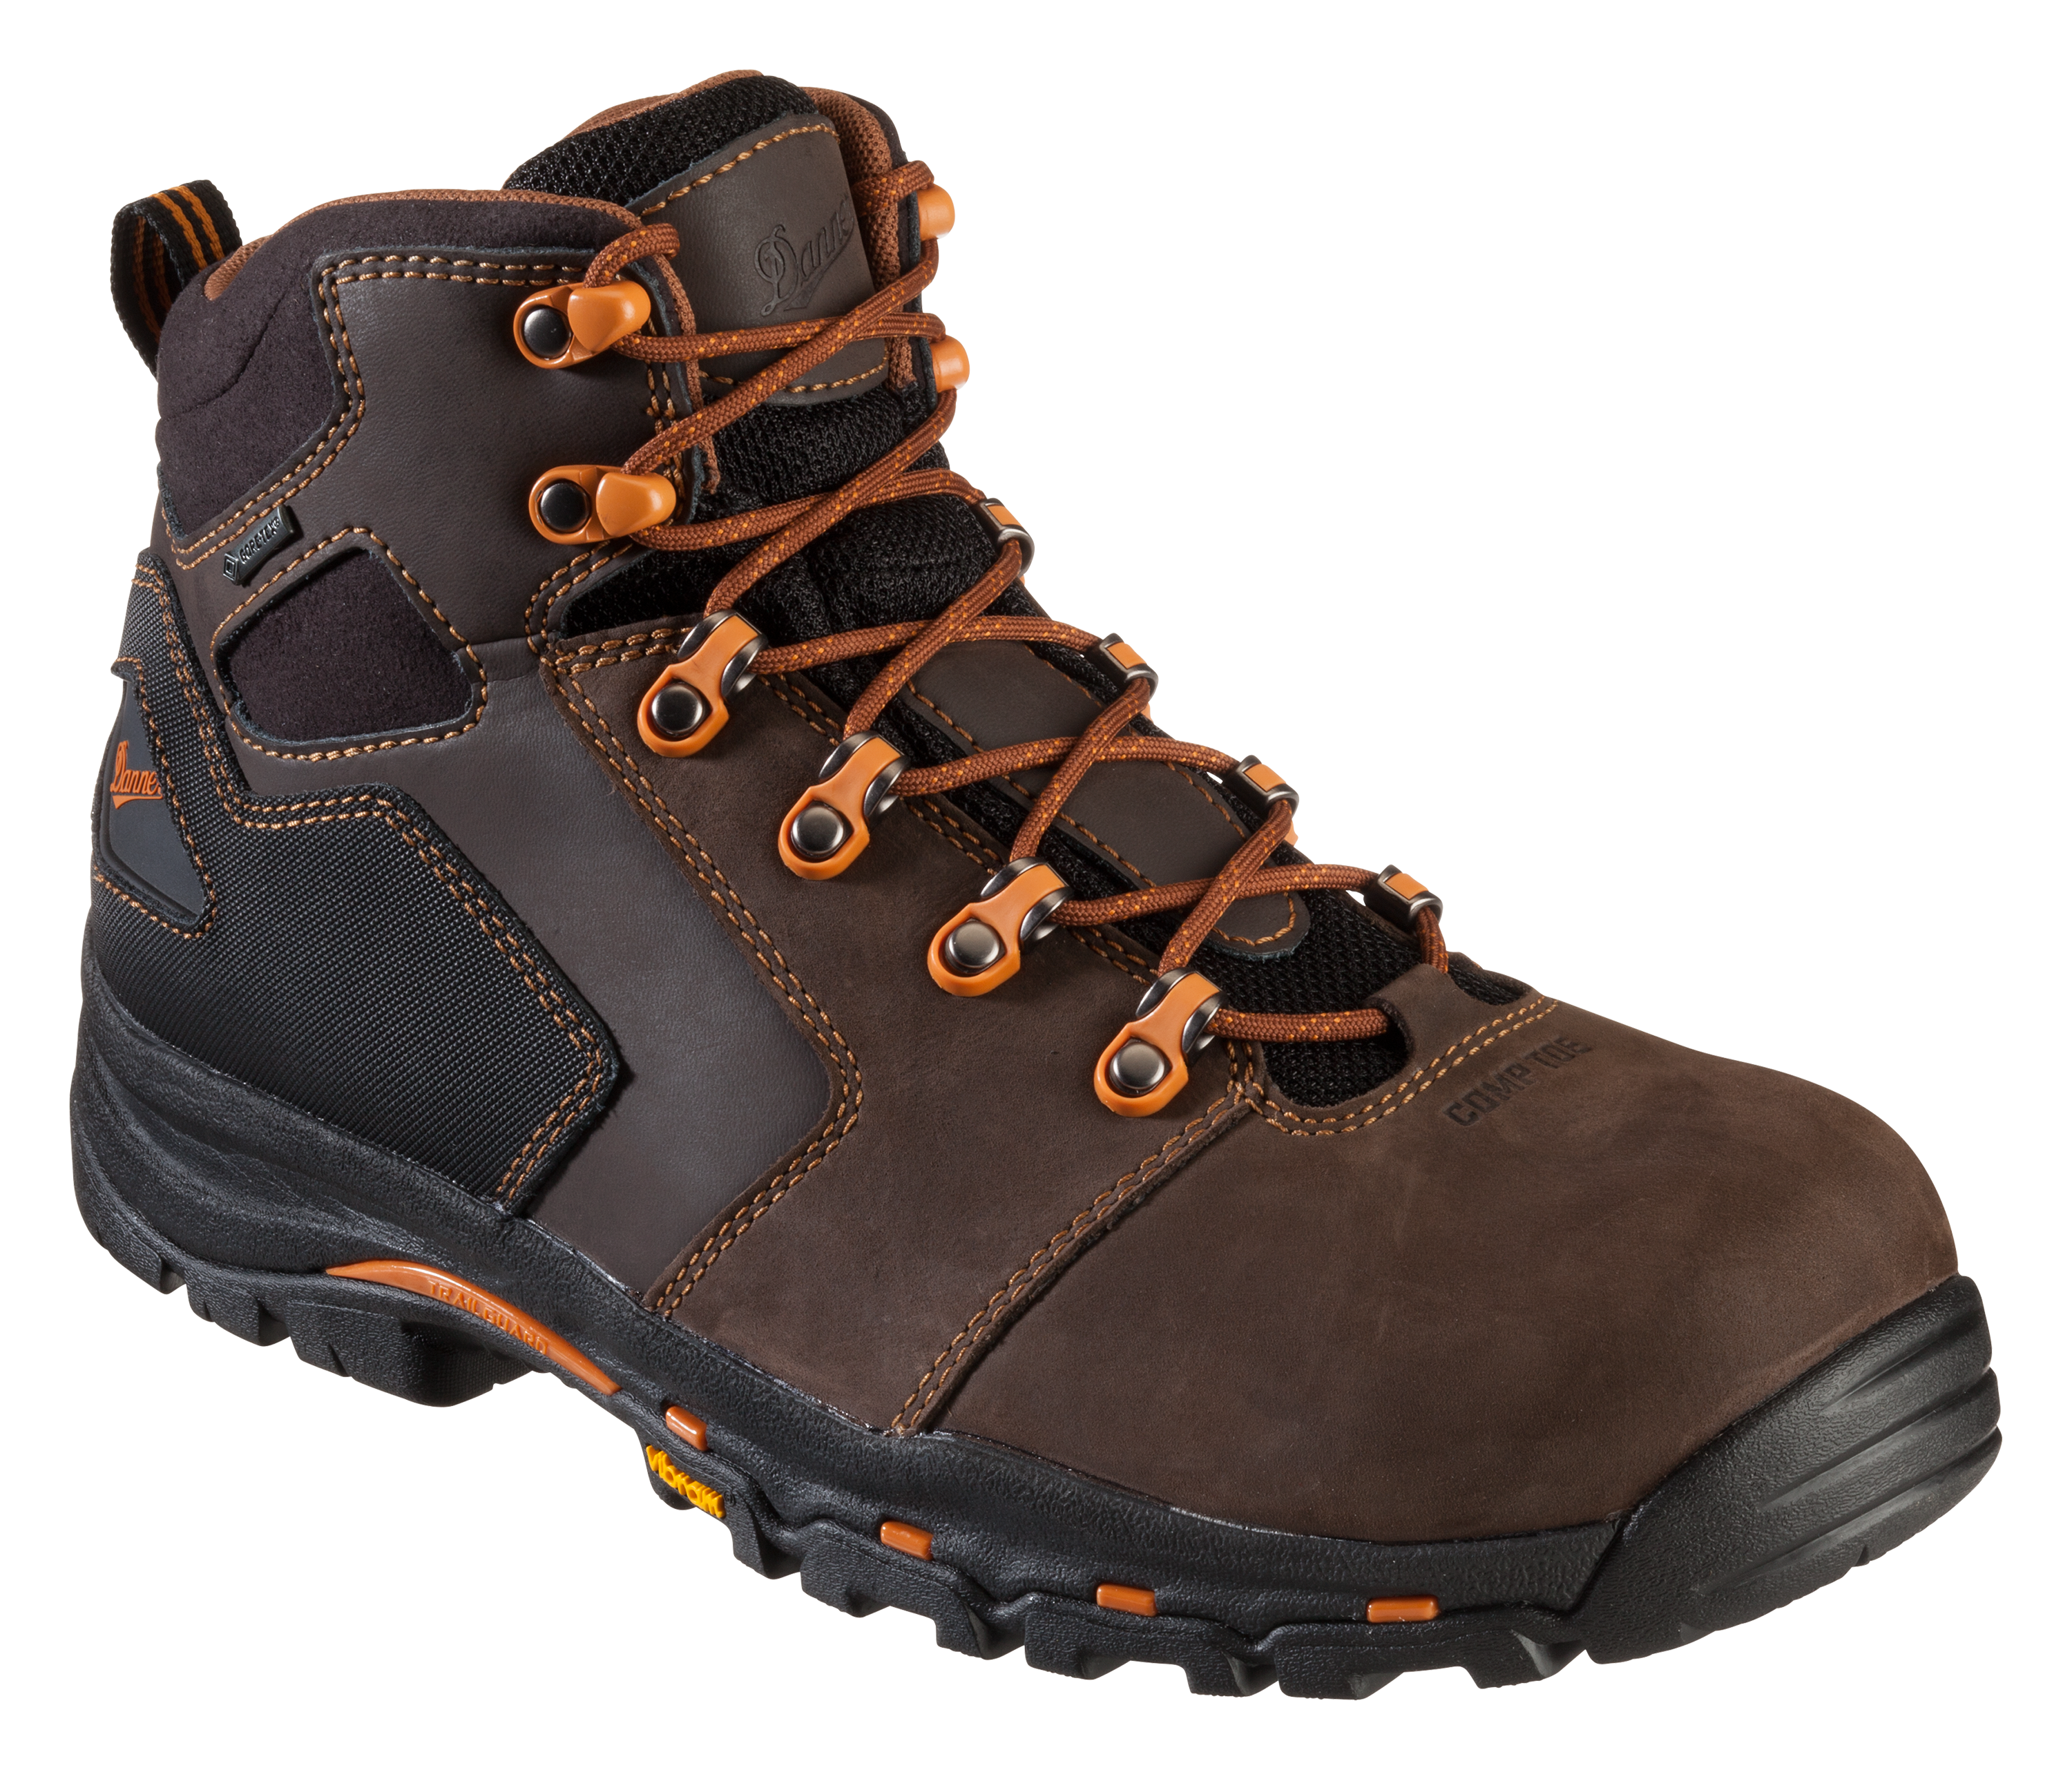 Danner Vicious GORE-TEX Non-Metallic Safety Toe Work Boots for Men - Brown - 8W